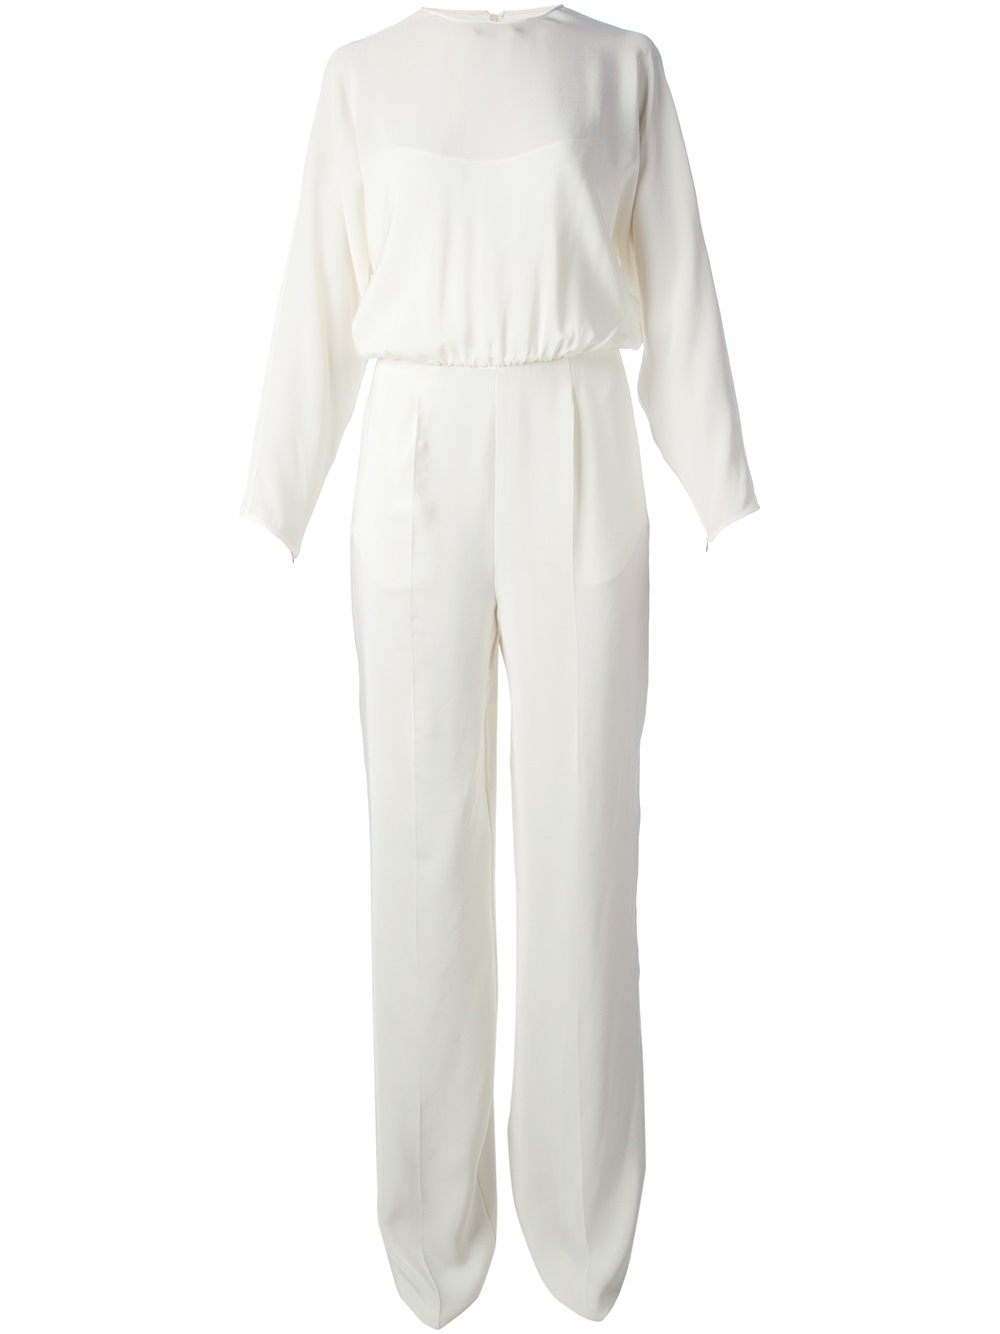 Lyst - Valentino Long Sleeve Jumpsuit in White